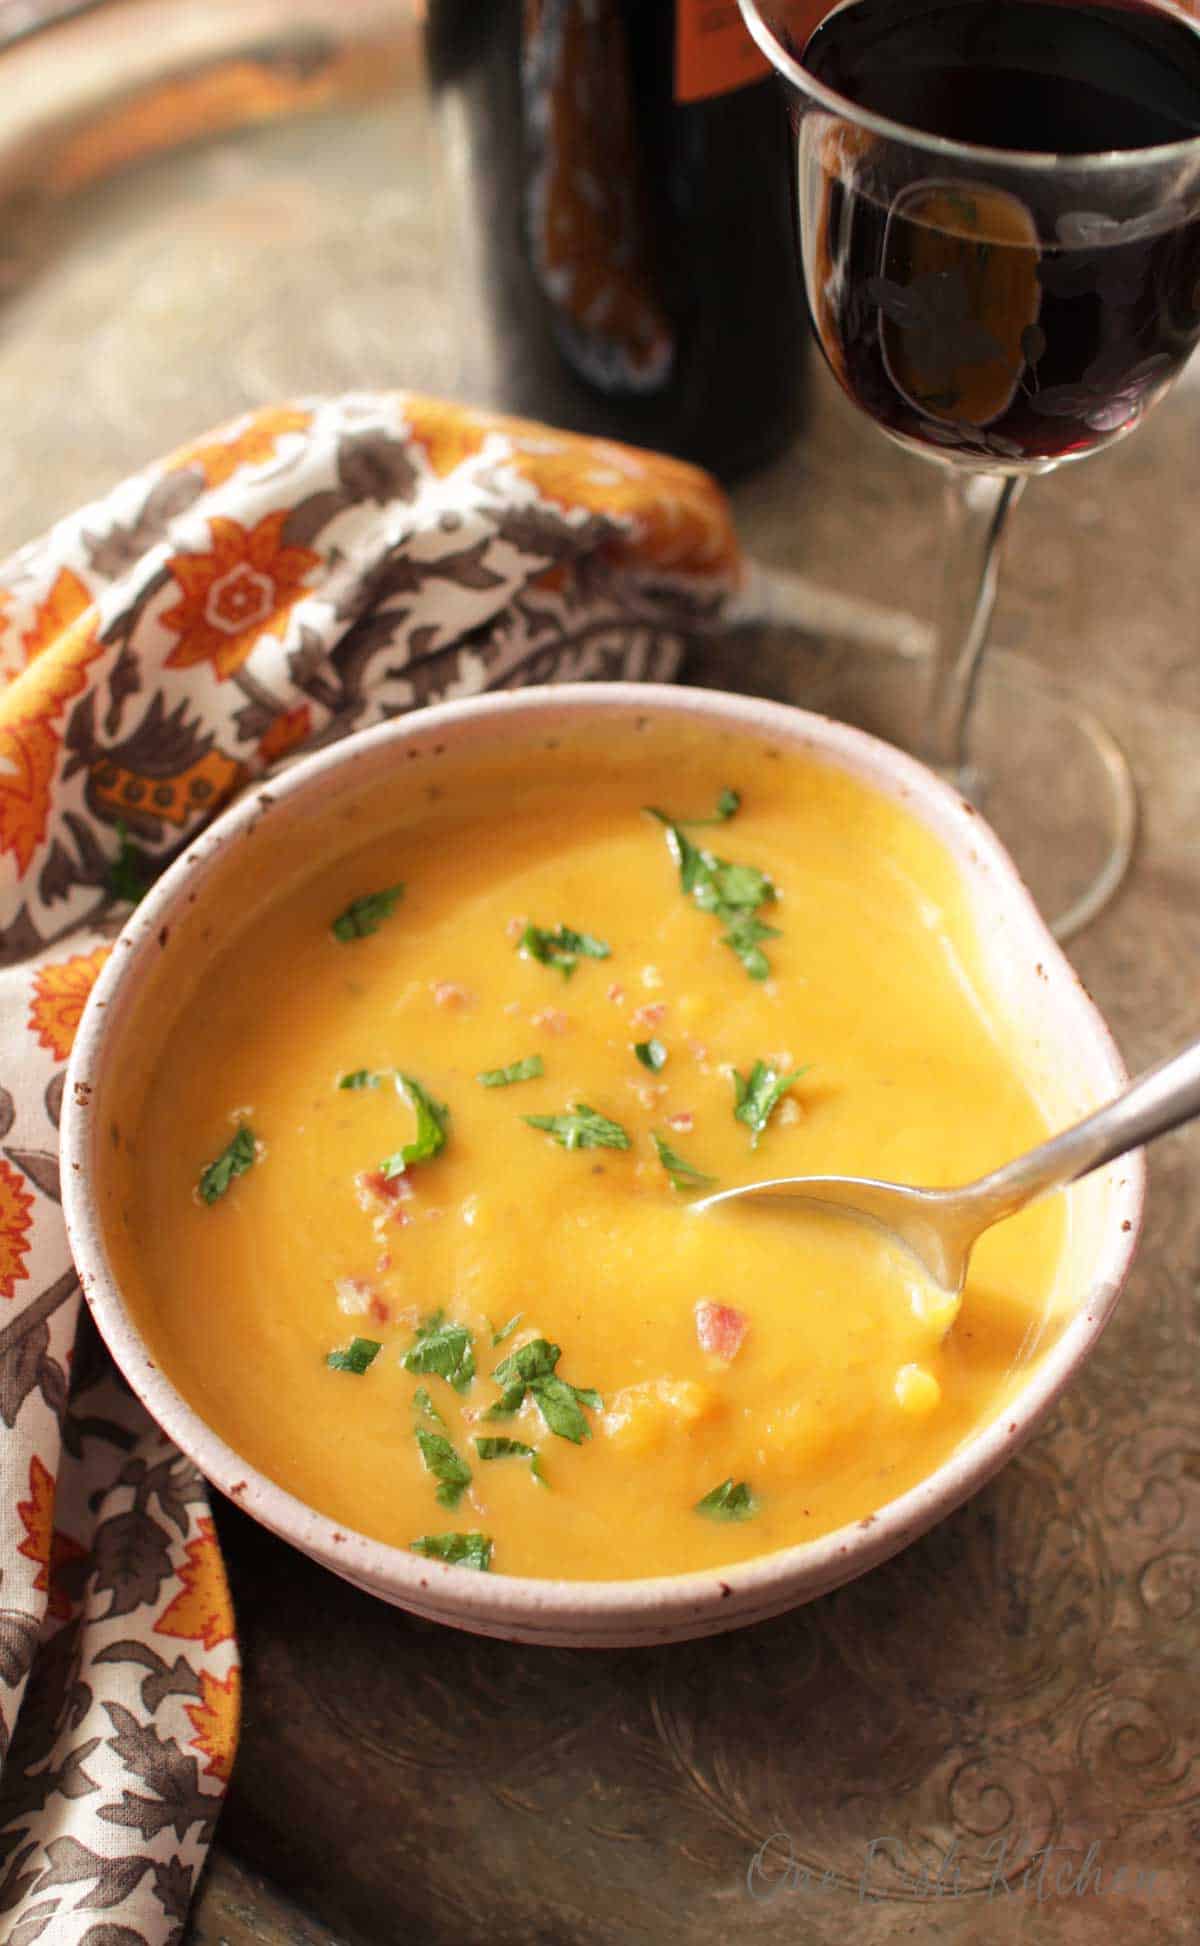 An overhead view of a spoon diving into a bowl of Butternut Squash Soup next to a glass of red wine and an orange and grey cloth napkin all on a metal tray.